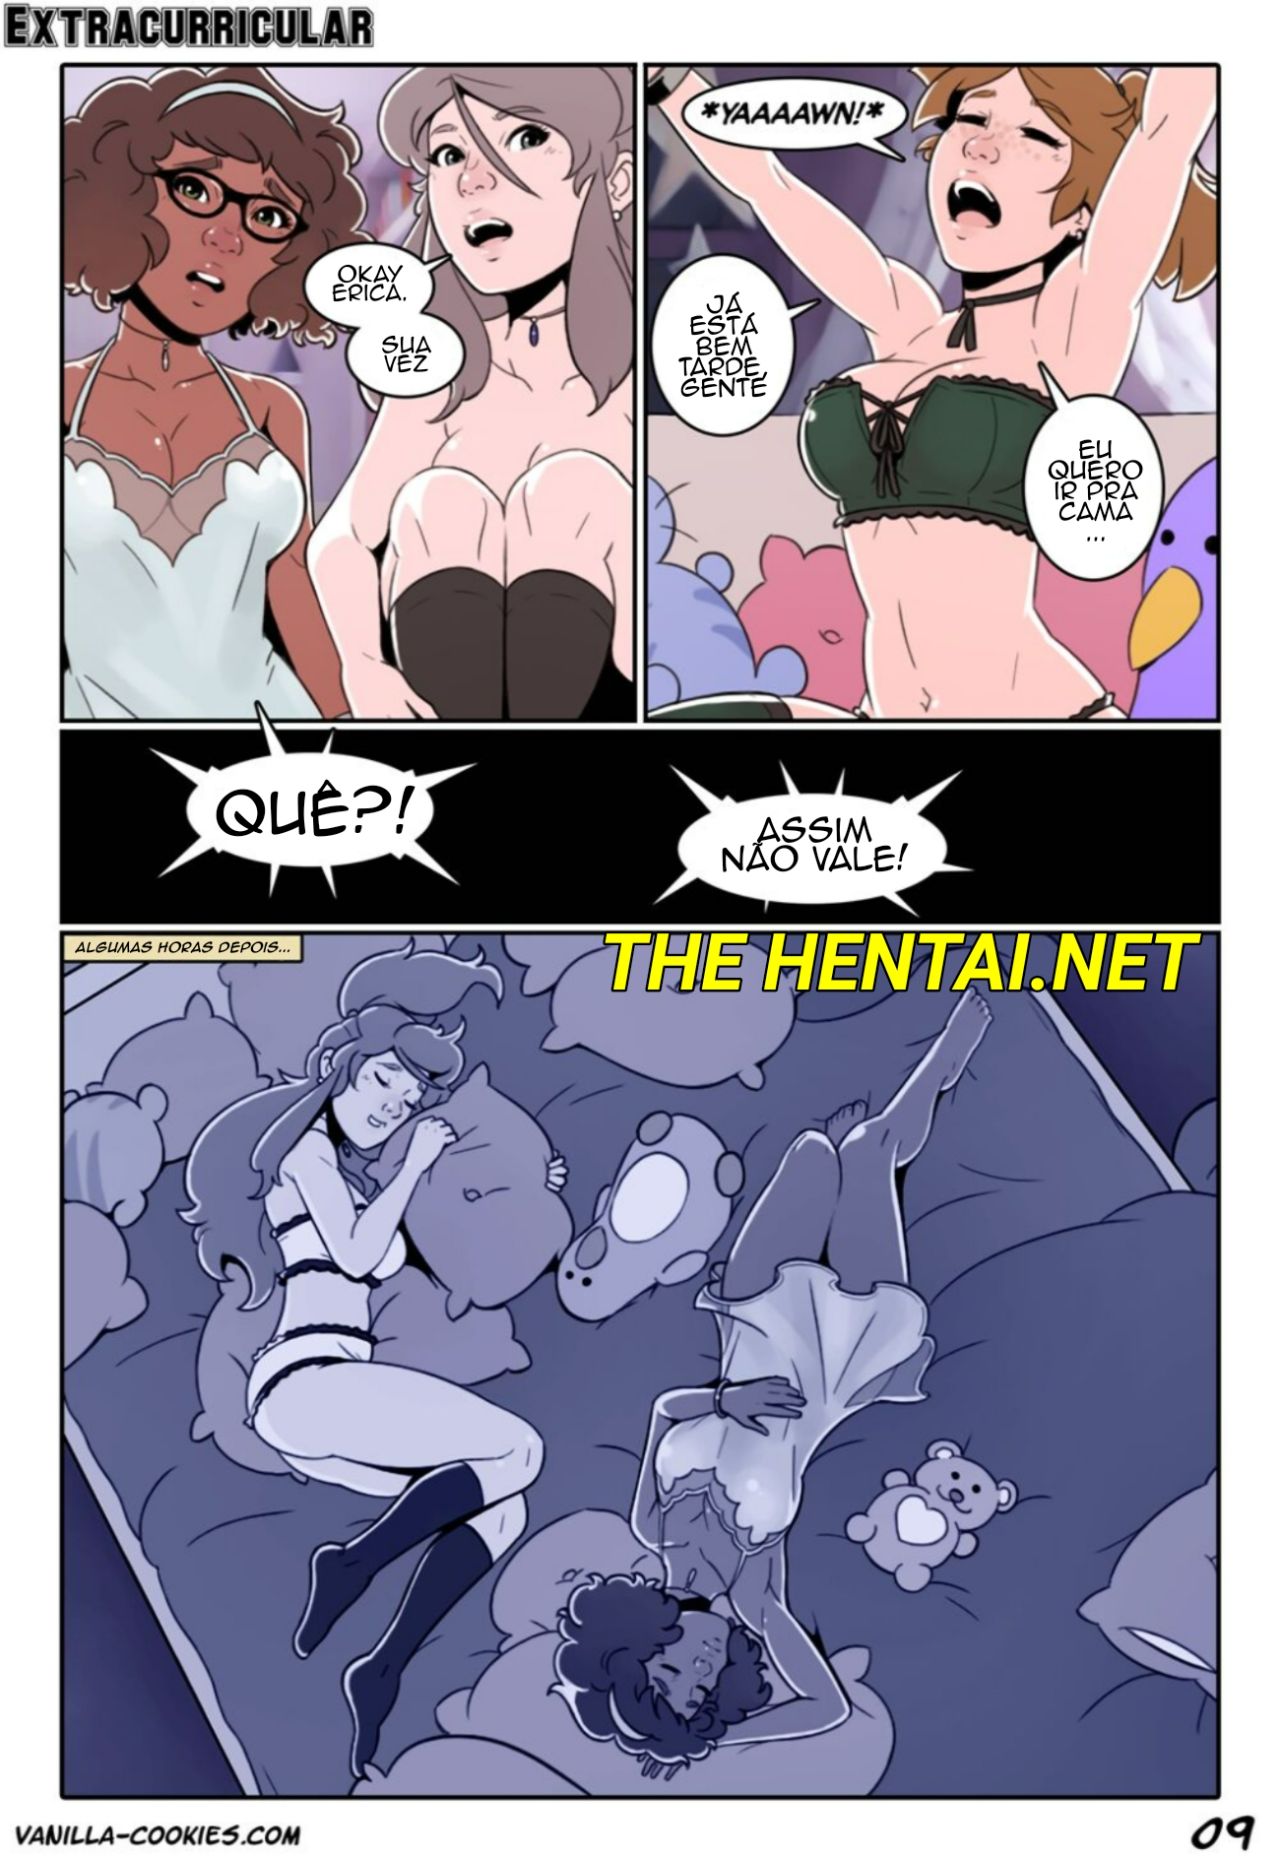 Extracurricular part 1 Hentai pt-br 10